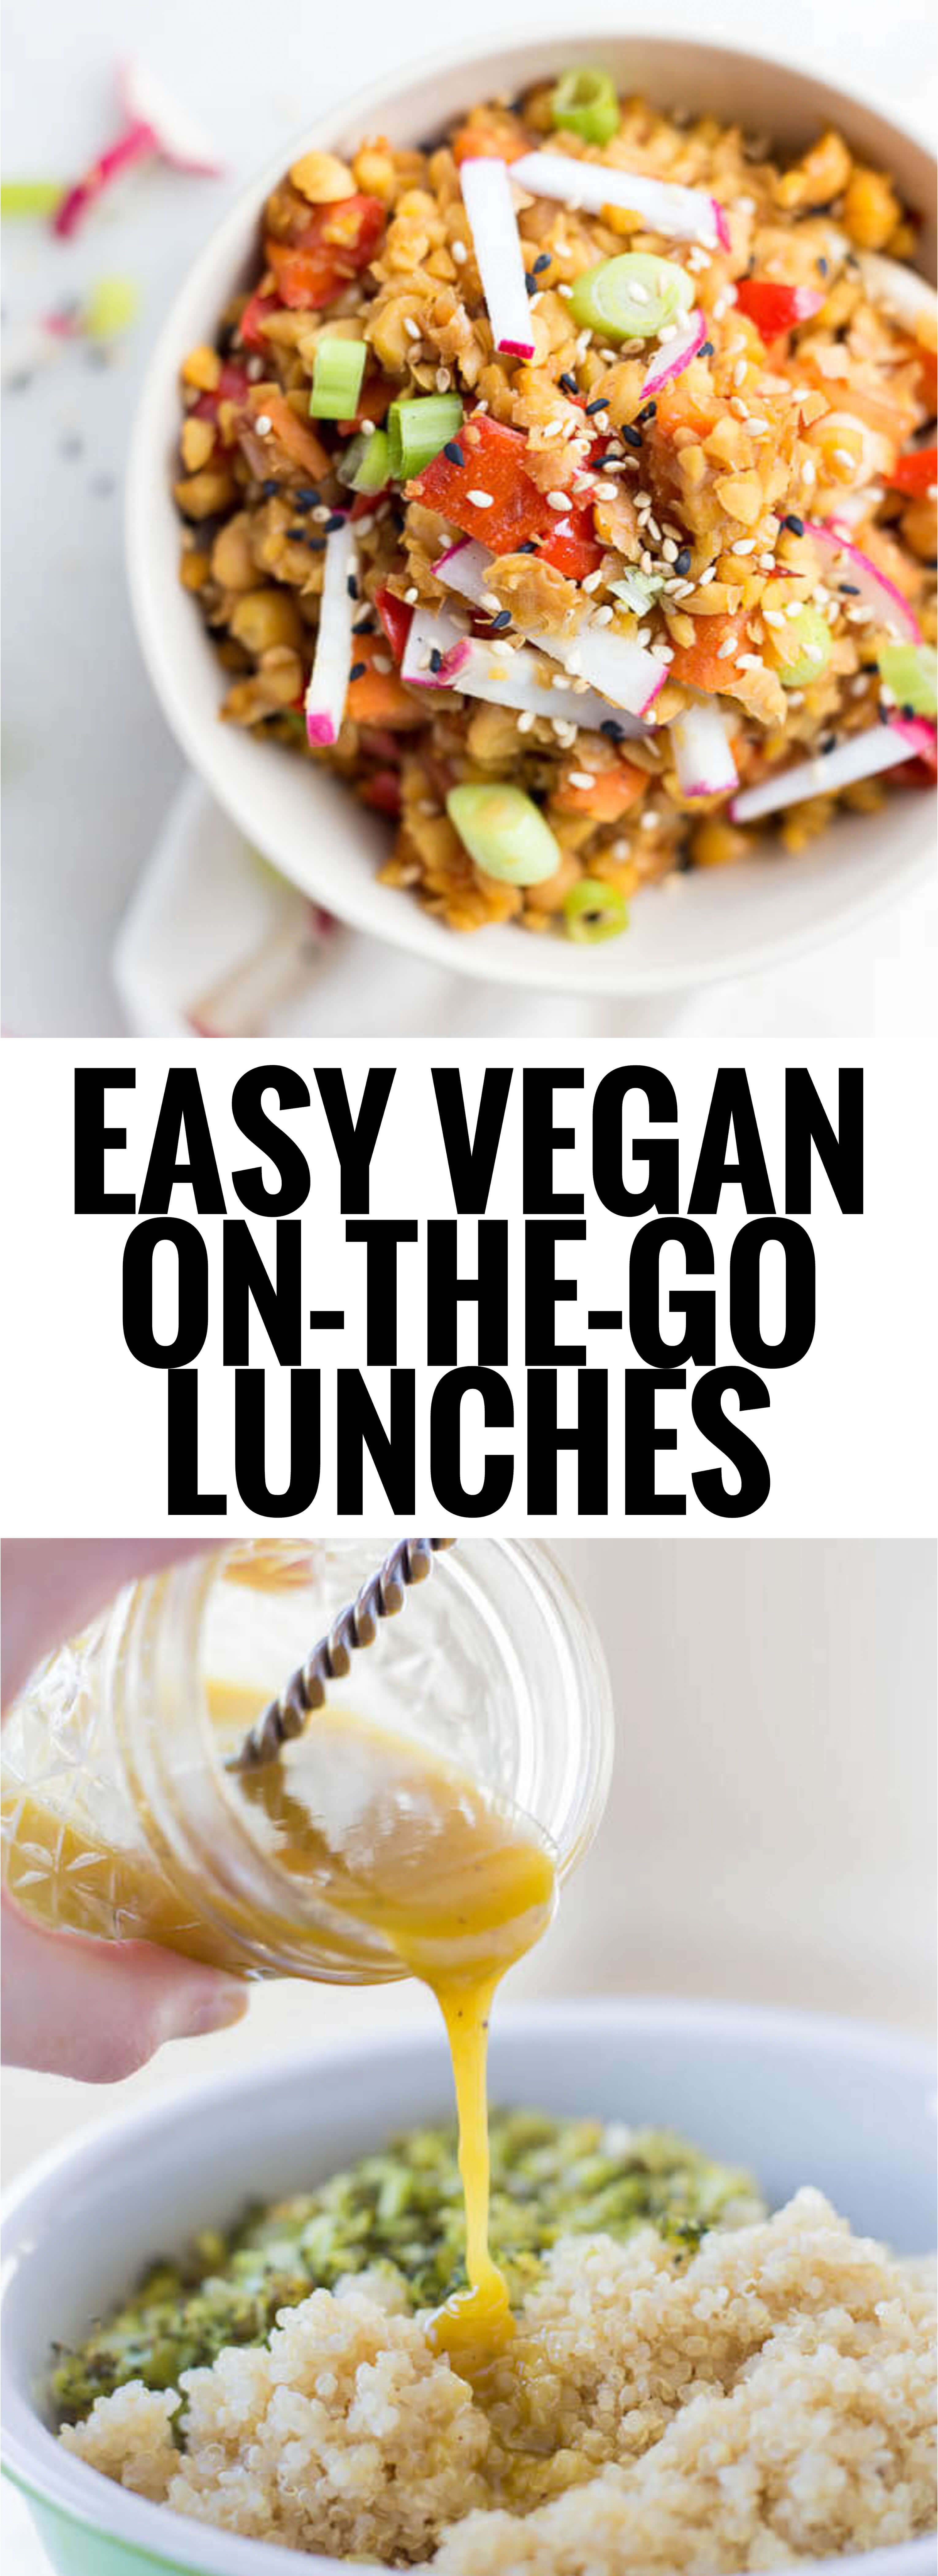 Healthy Lunches On The Go
 Easy Vegan the Go Lunches Fooduzzi